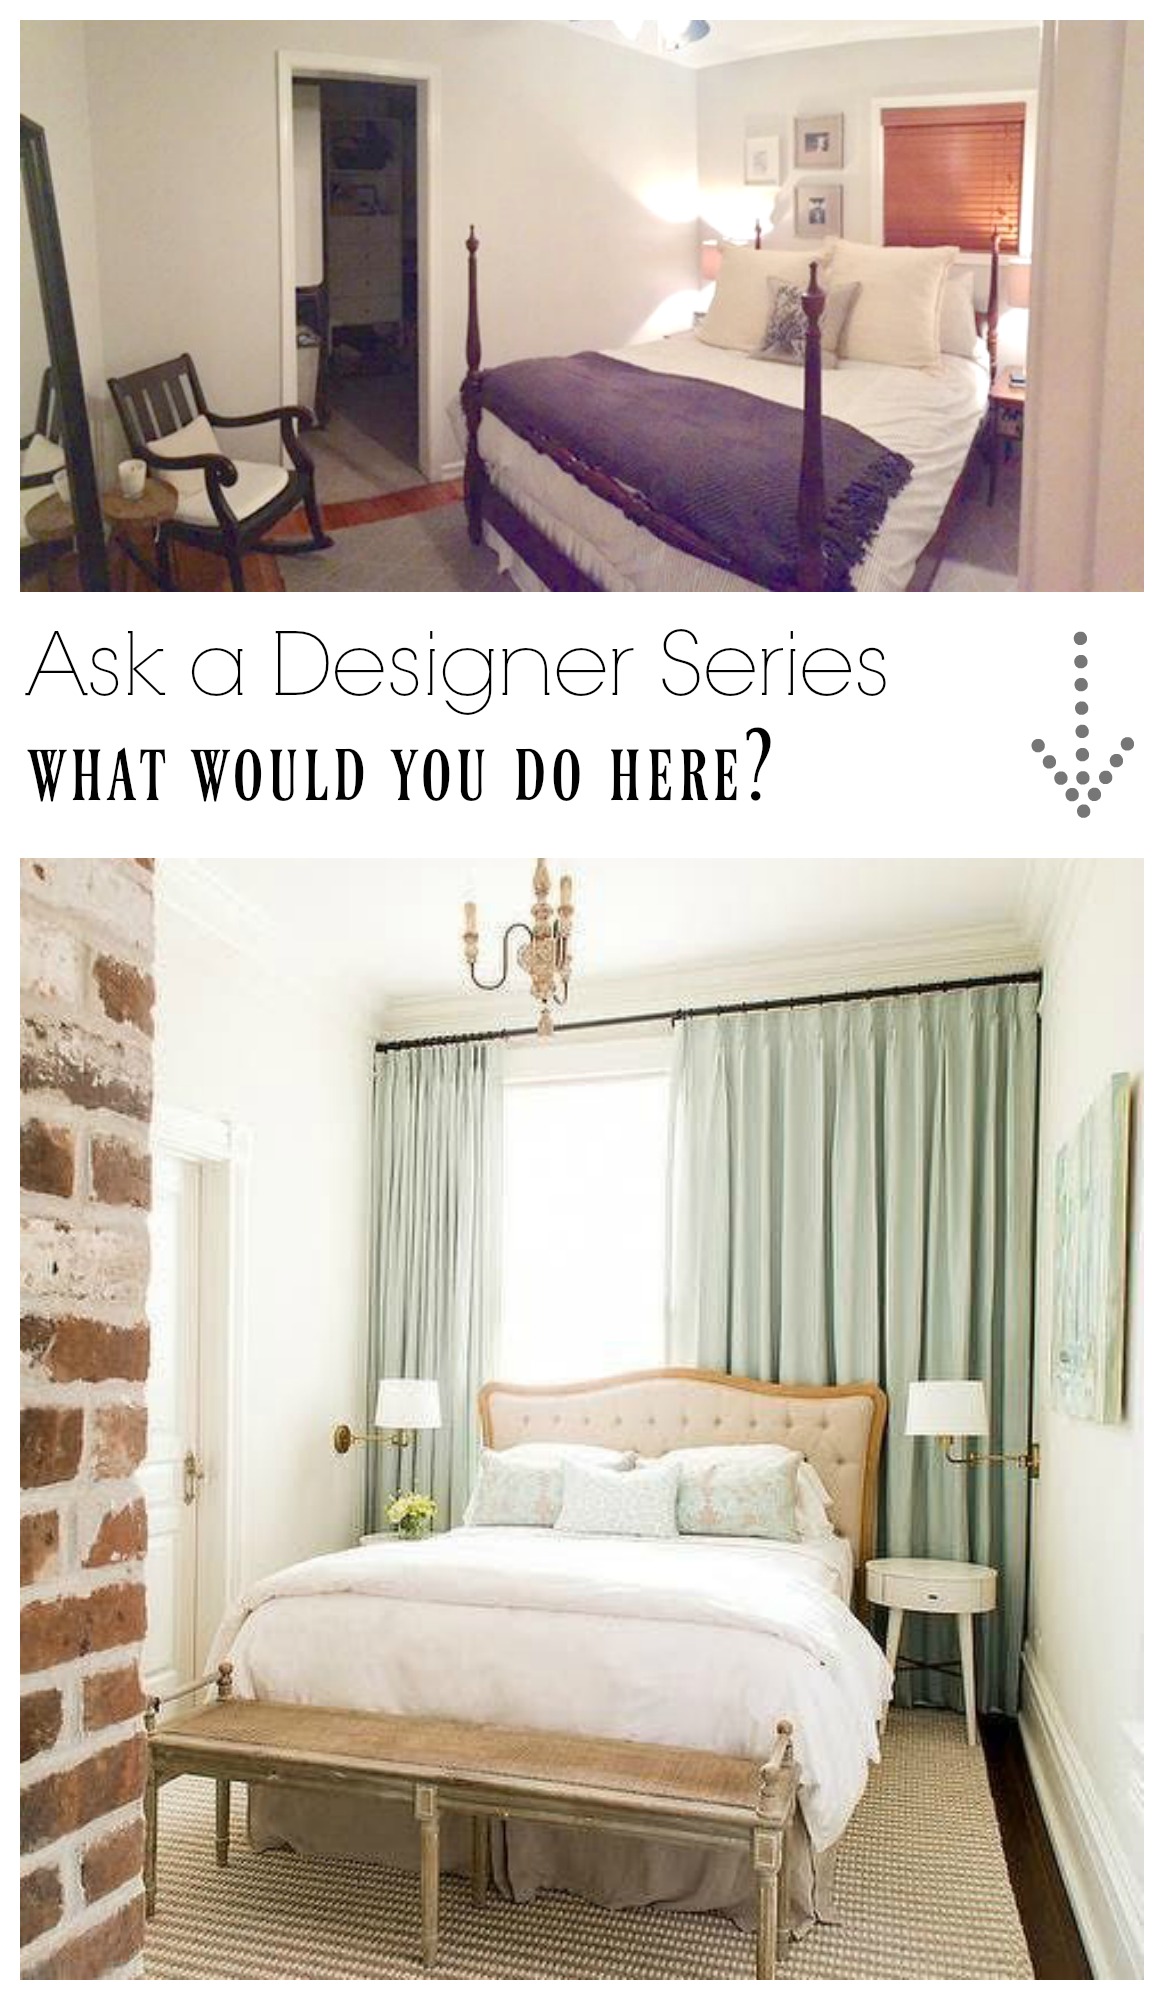 Ask a Designer Series- What would you do with this small bedroom?